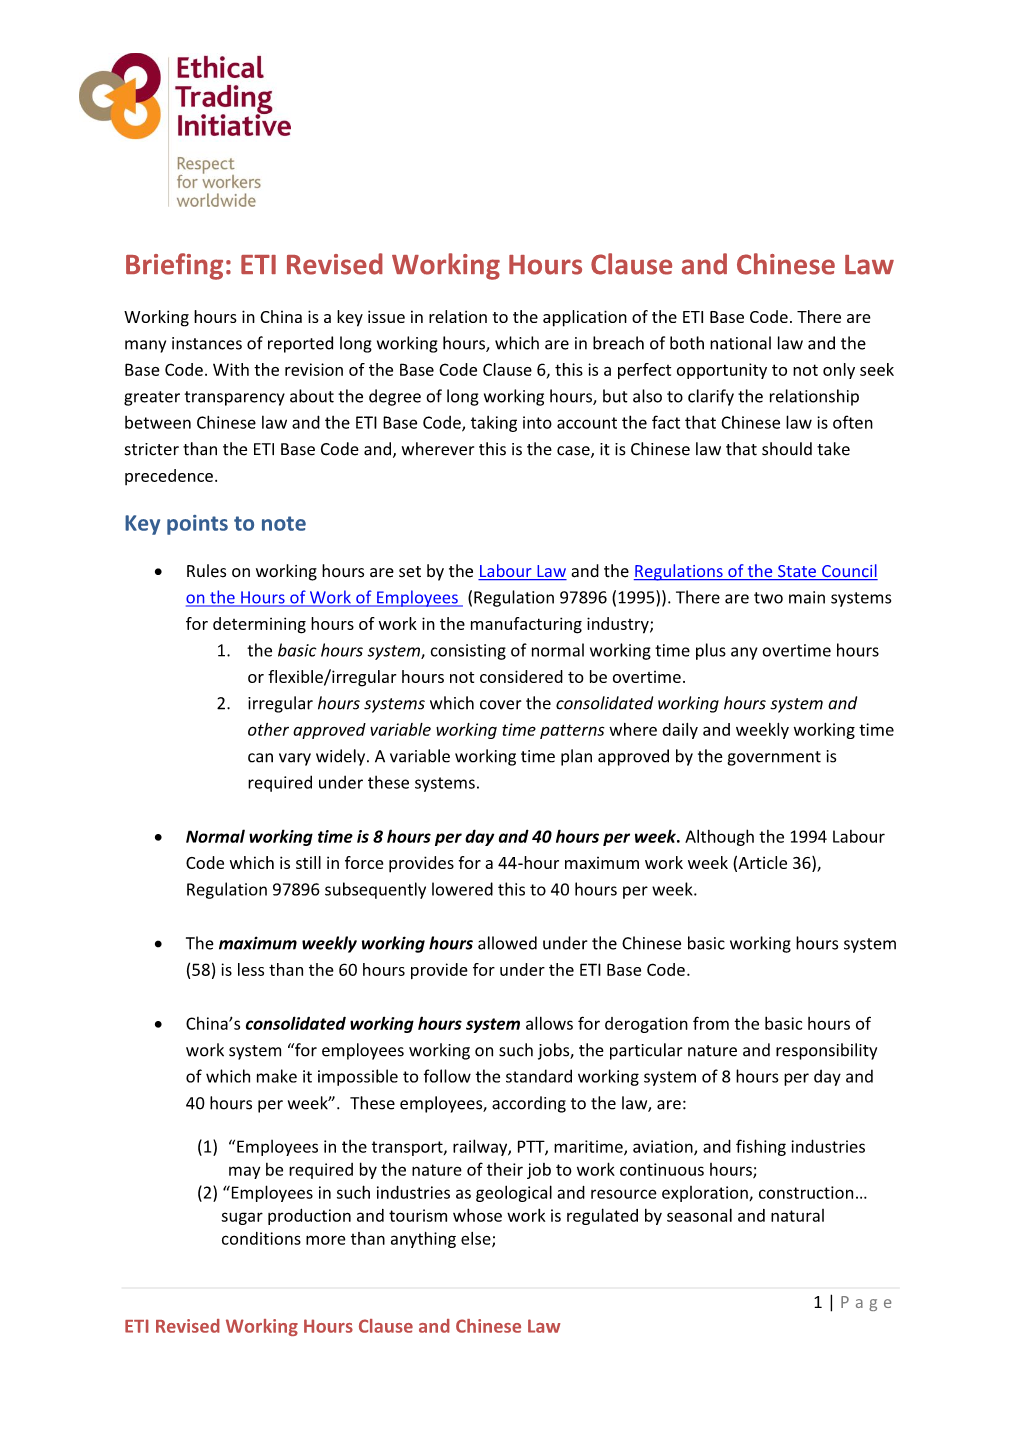 Briefing: ETI Revised Working Hours Clause and Chinese Law